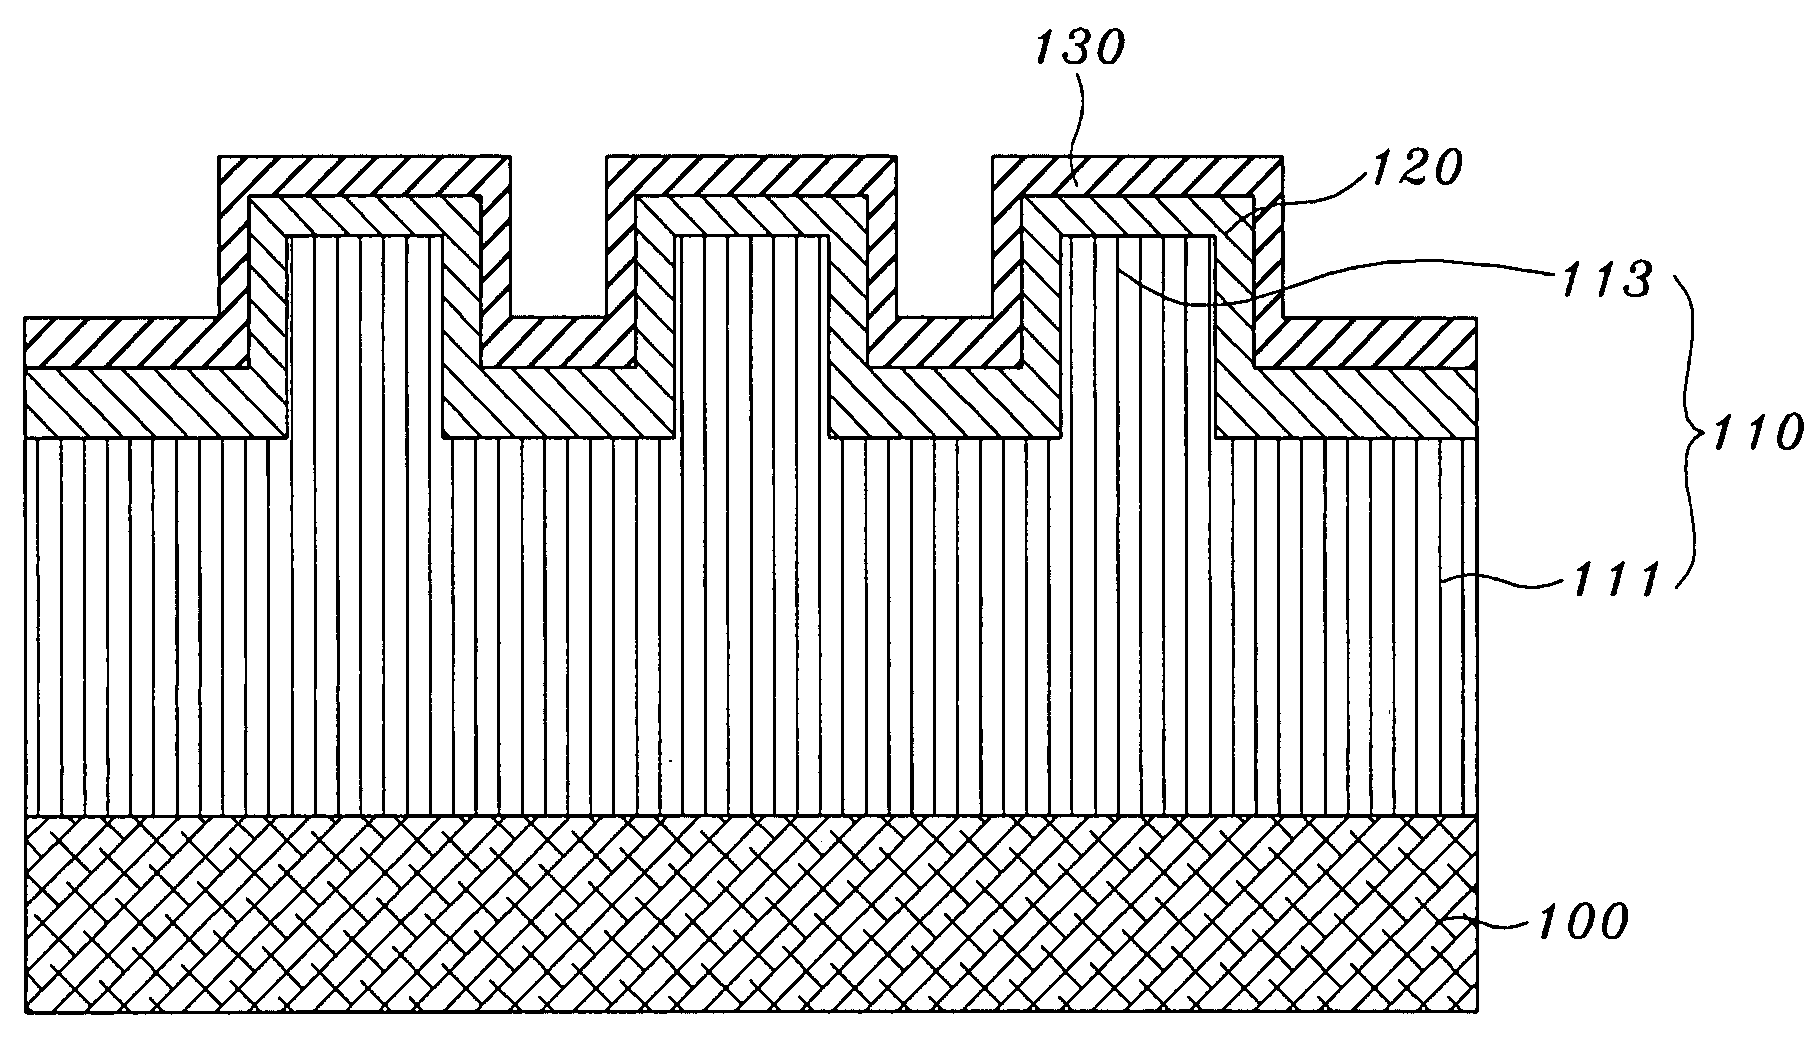 Mold for nano-imprinting and method of manufacturing the same